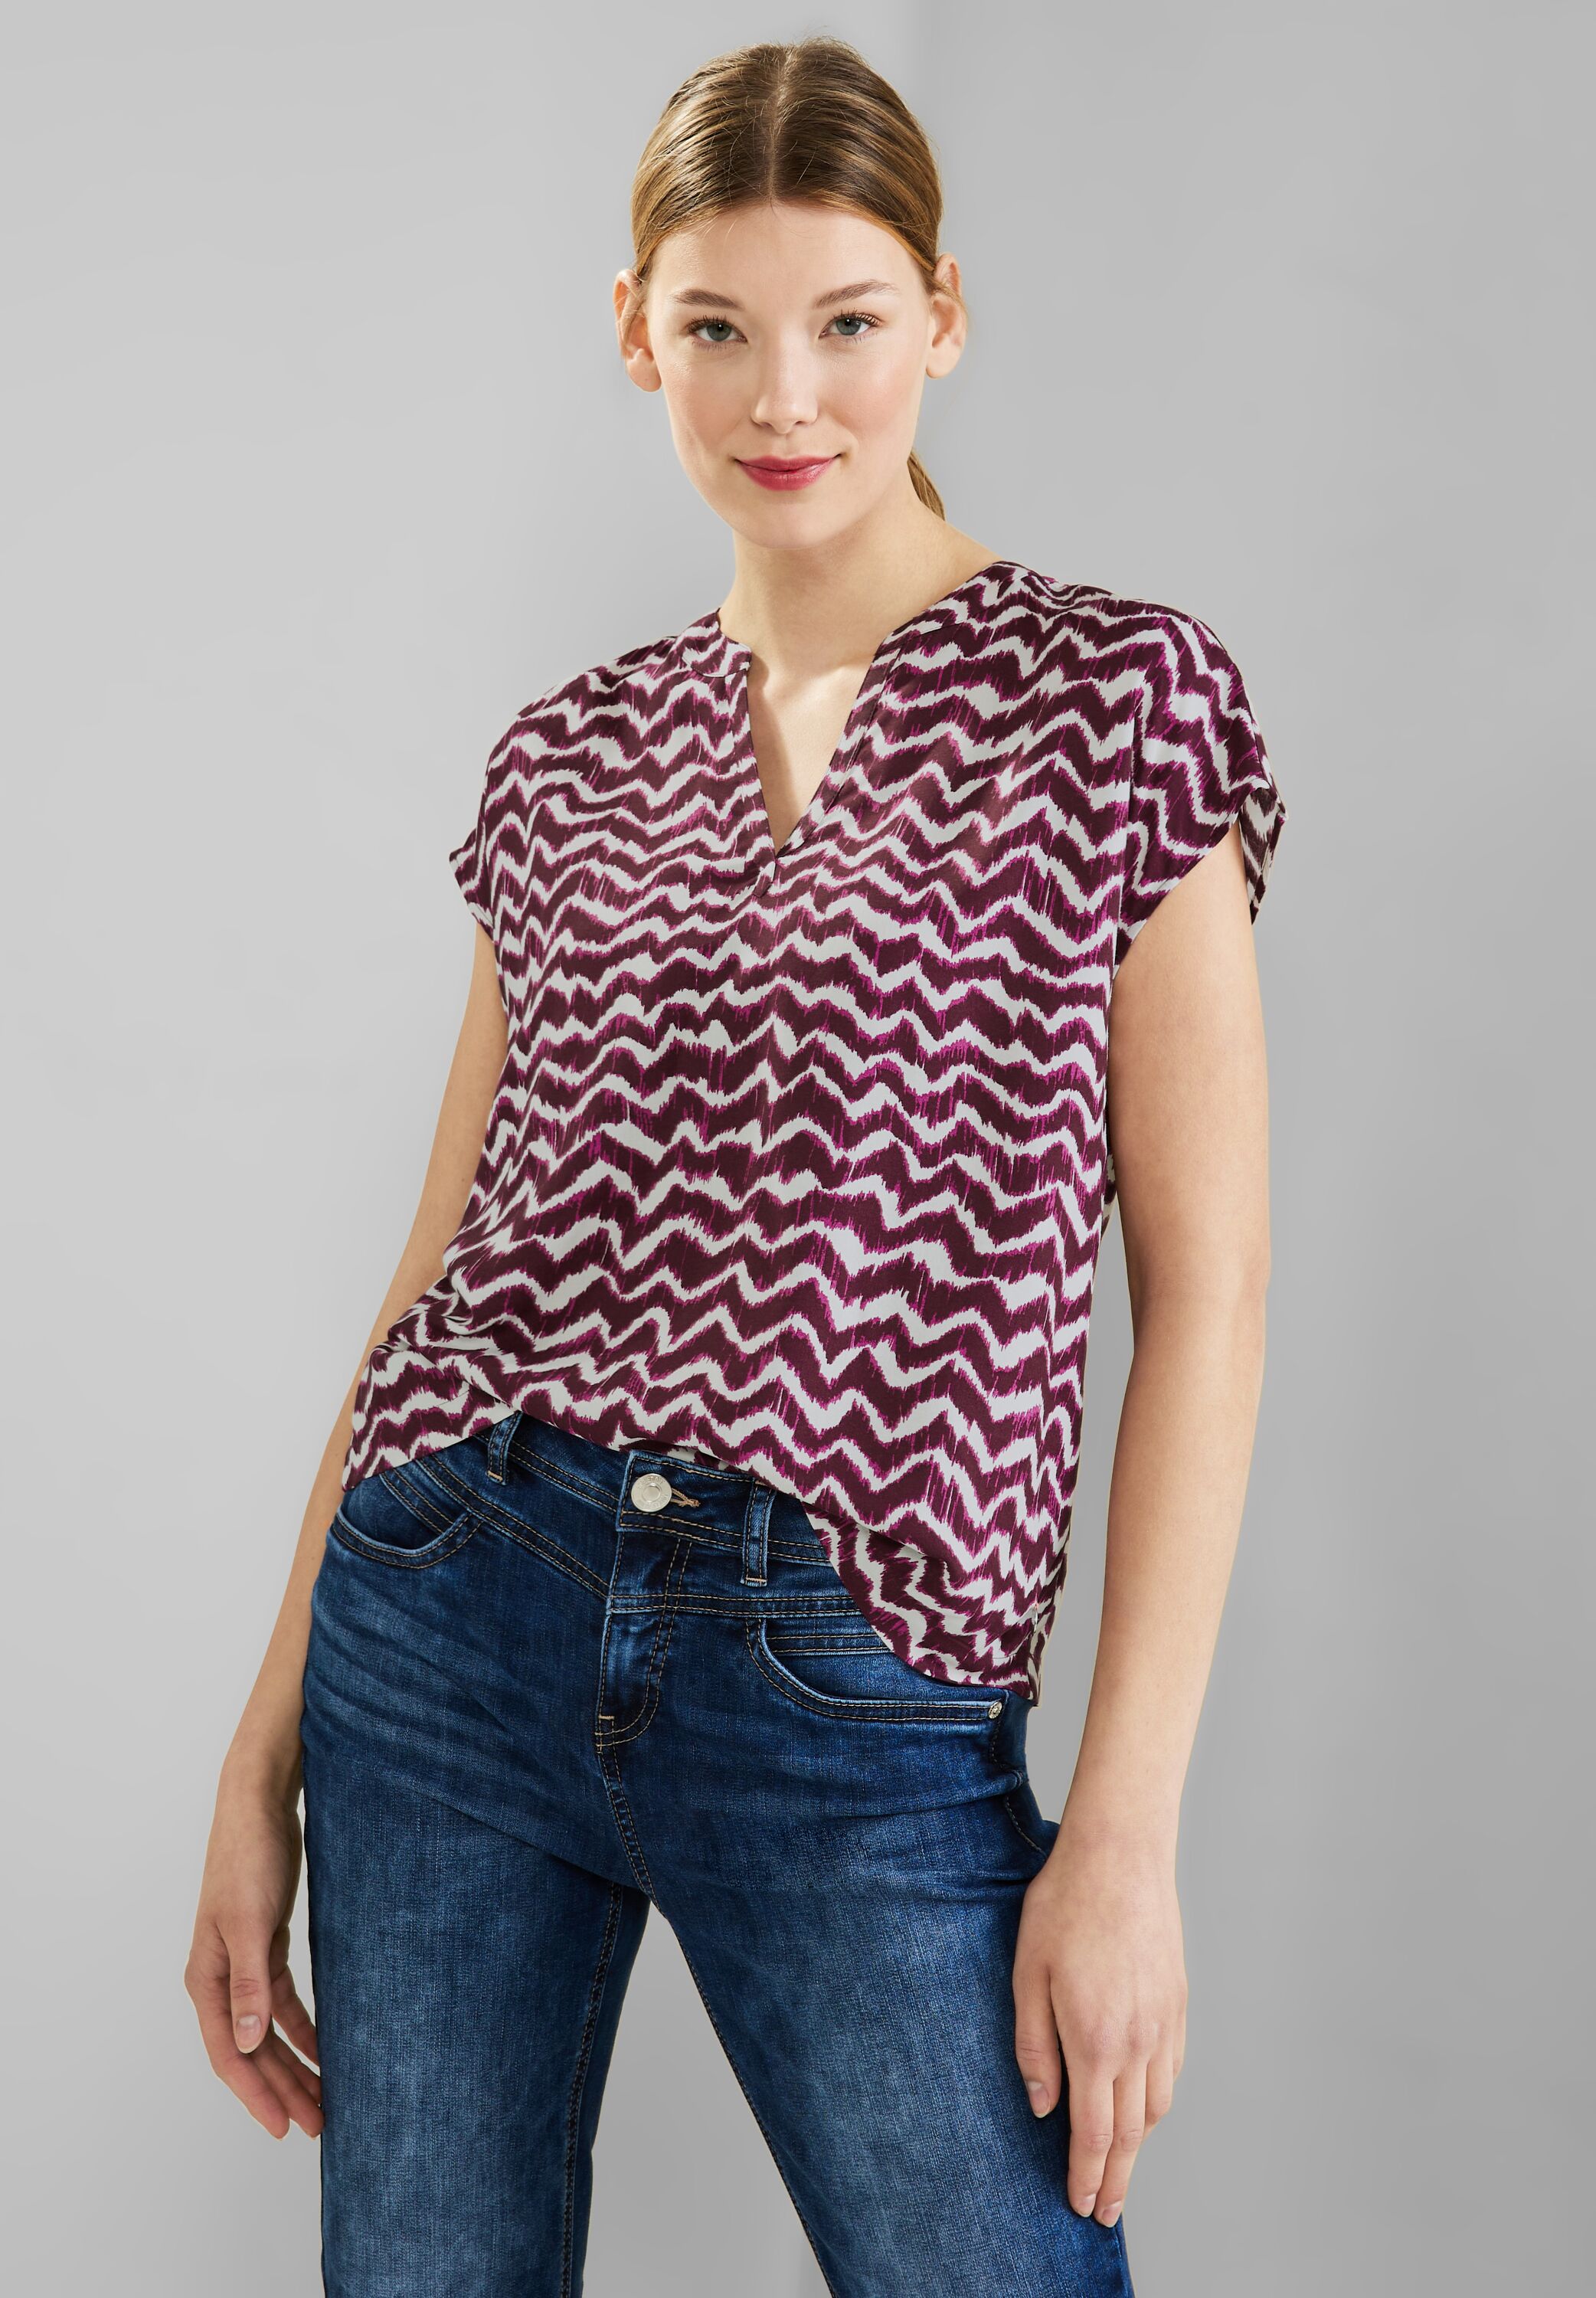 Street One Shirtbluse in Tamed SALE - CONCEPT im A343896-34886 Berry Mode reduziert